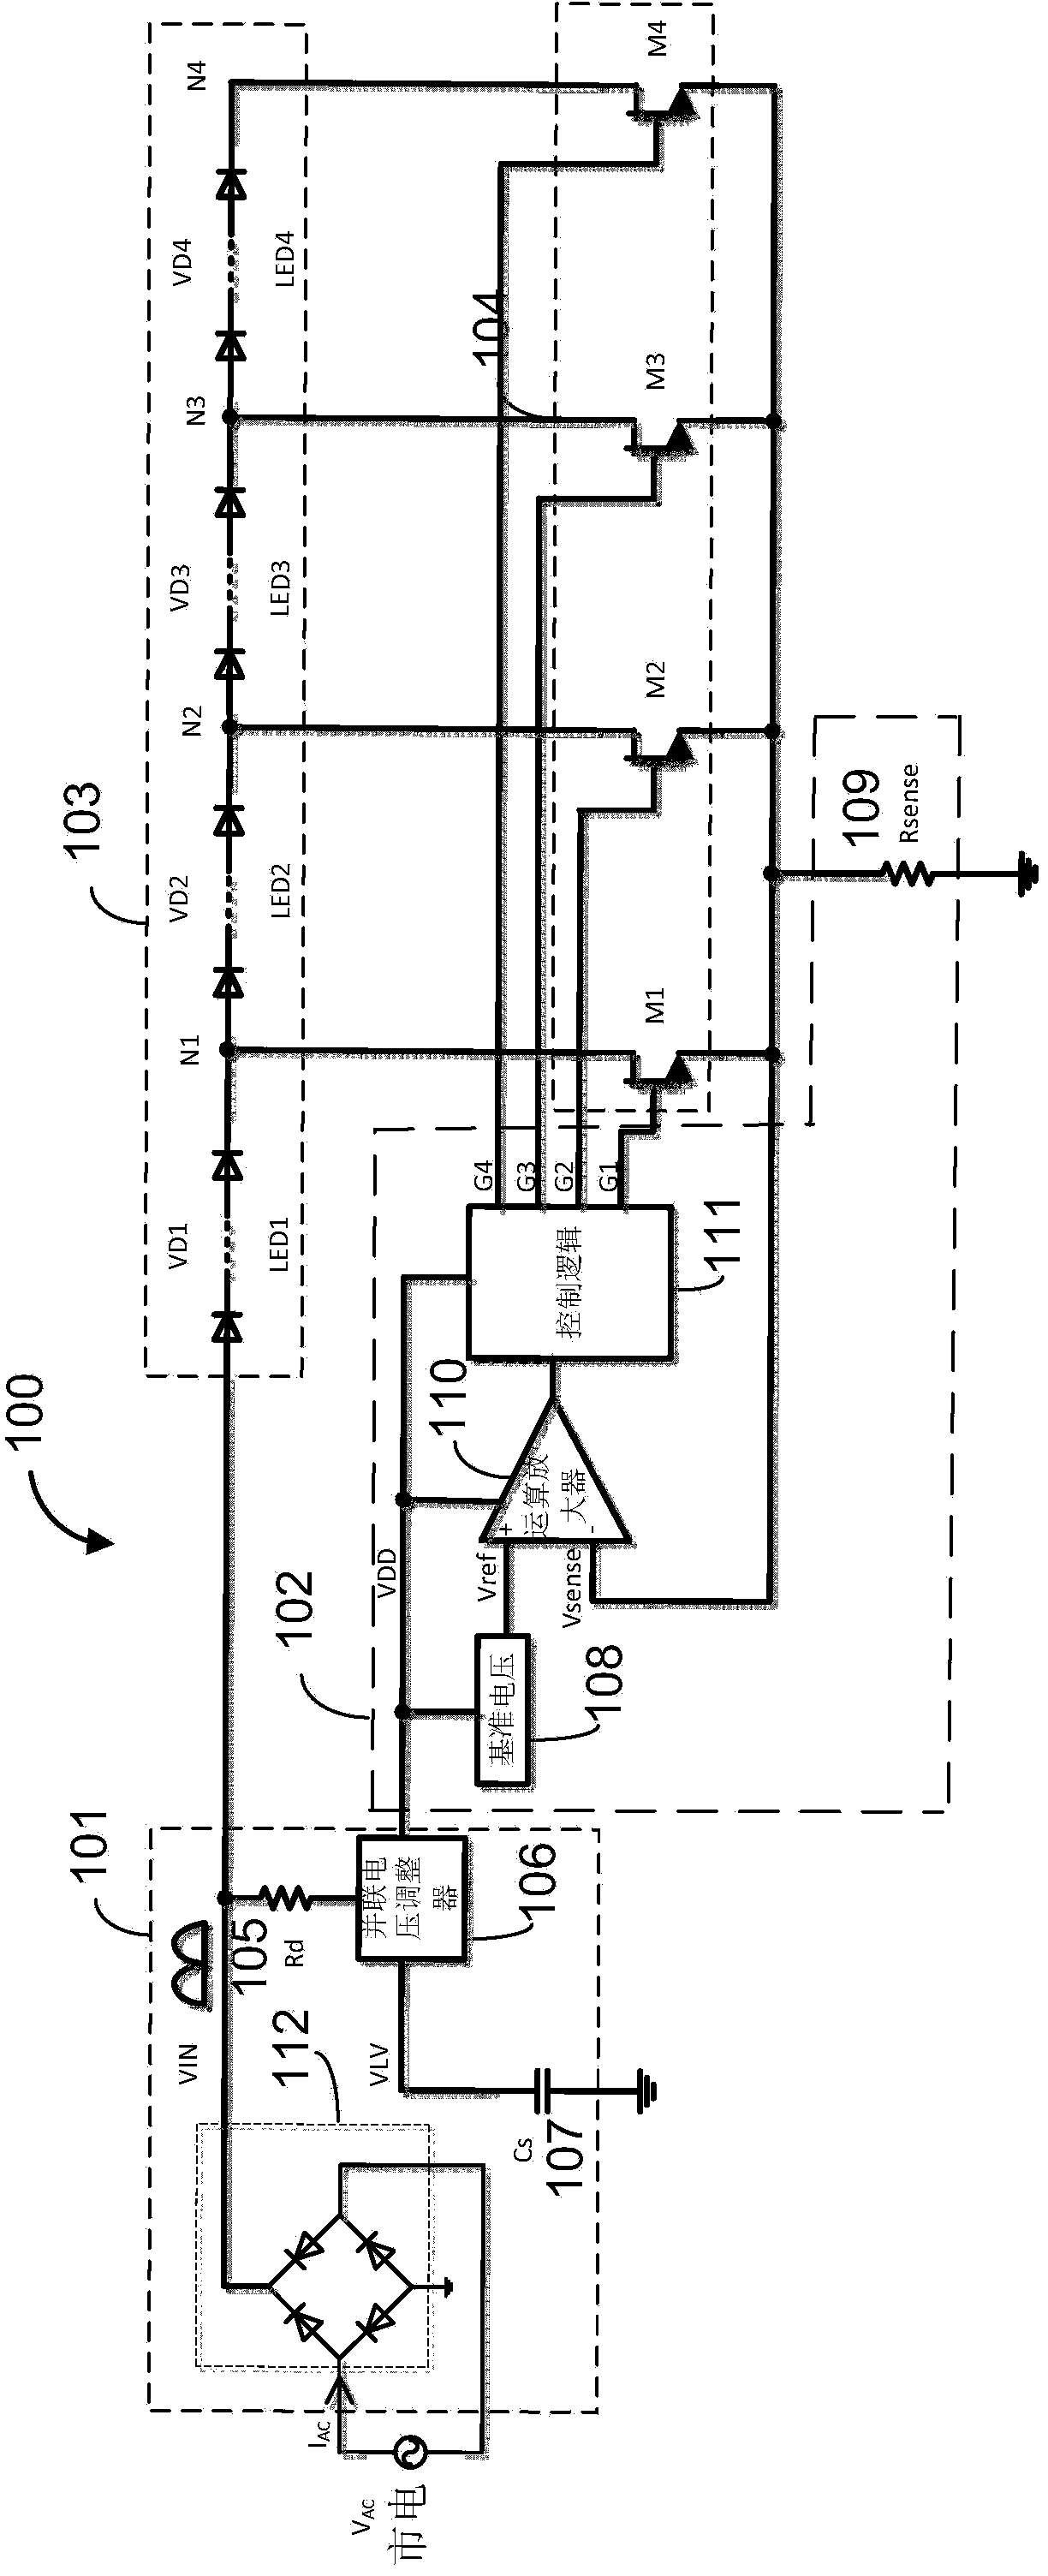 Multi-channel light-emitting diode (LED) linear driver